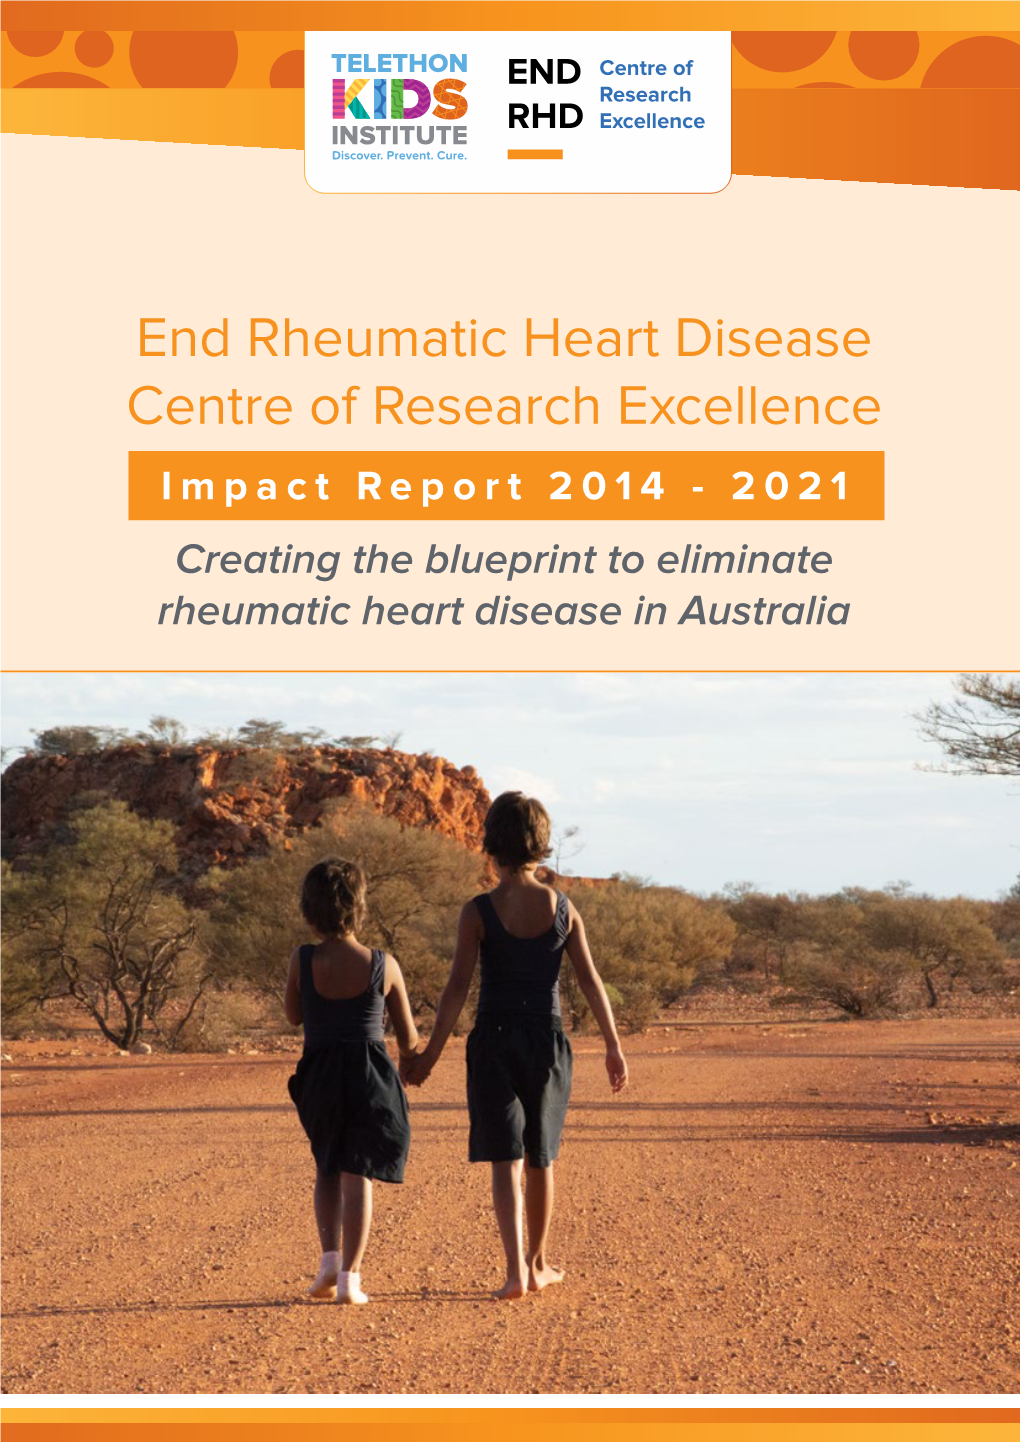 END RHD Centre of Research Excellence (END RHD CRE), Was Funded by a Grant from the National ACKNOWLEDGEMENTS 2 Health and Medical Research Council (NHMRC)